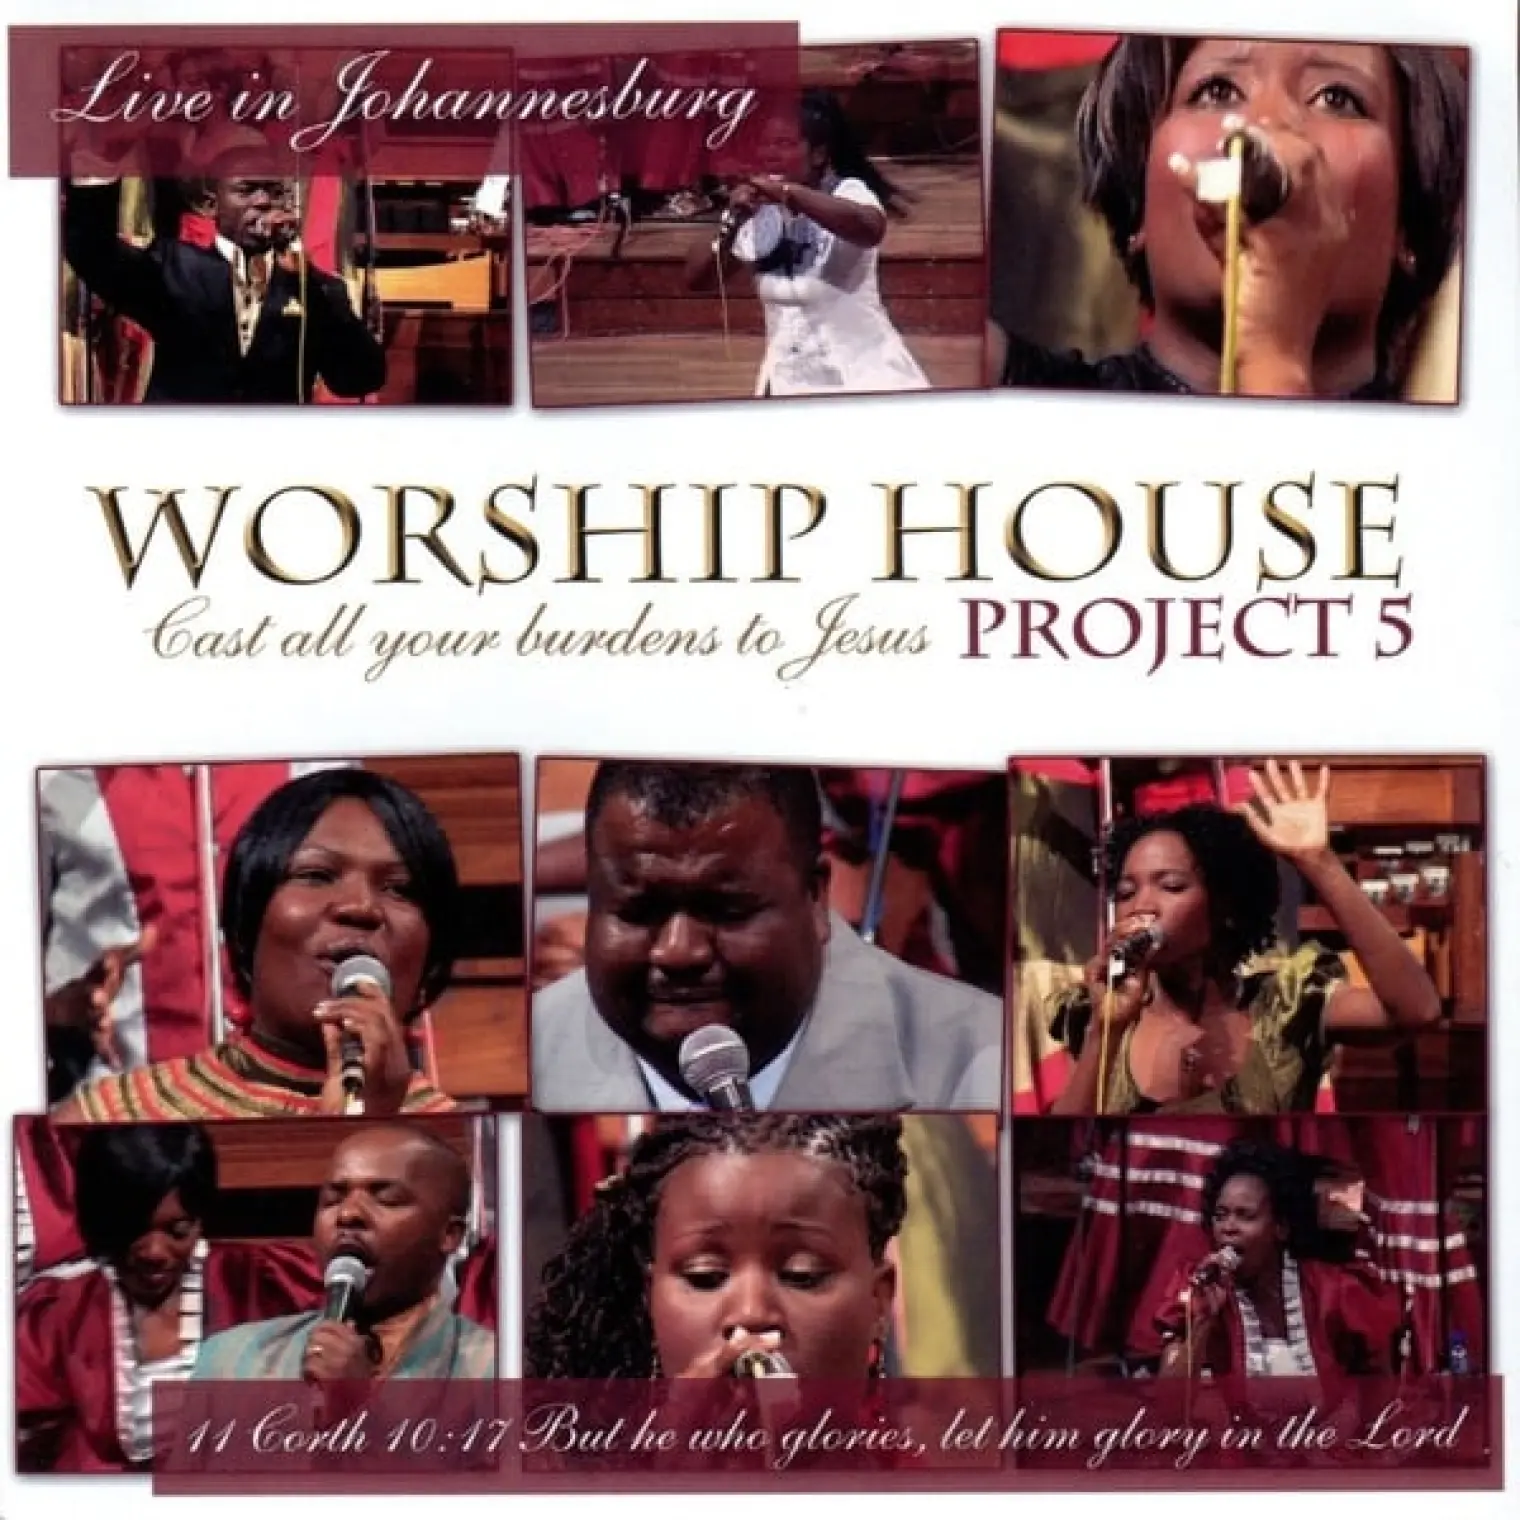 Project 5: Cast All Your Burdens to Jesus, Live in Johannesburgs, -  Worship House 